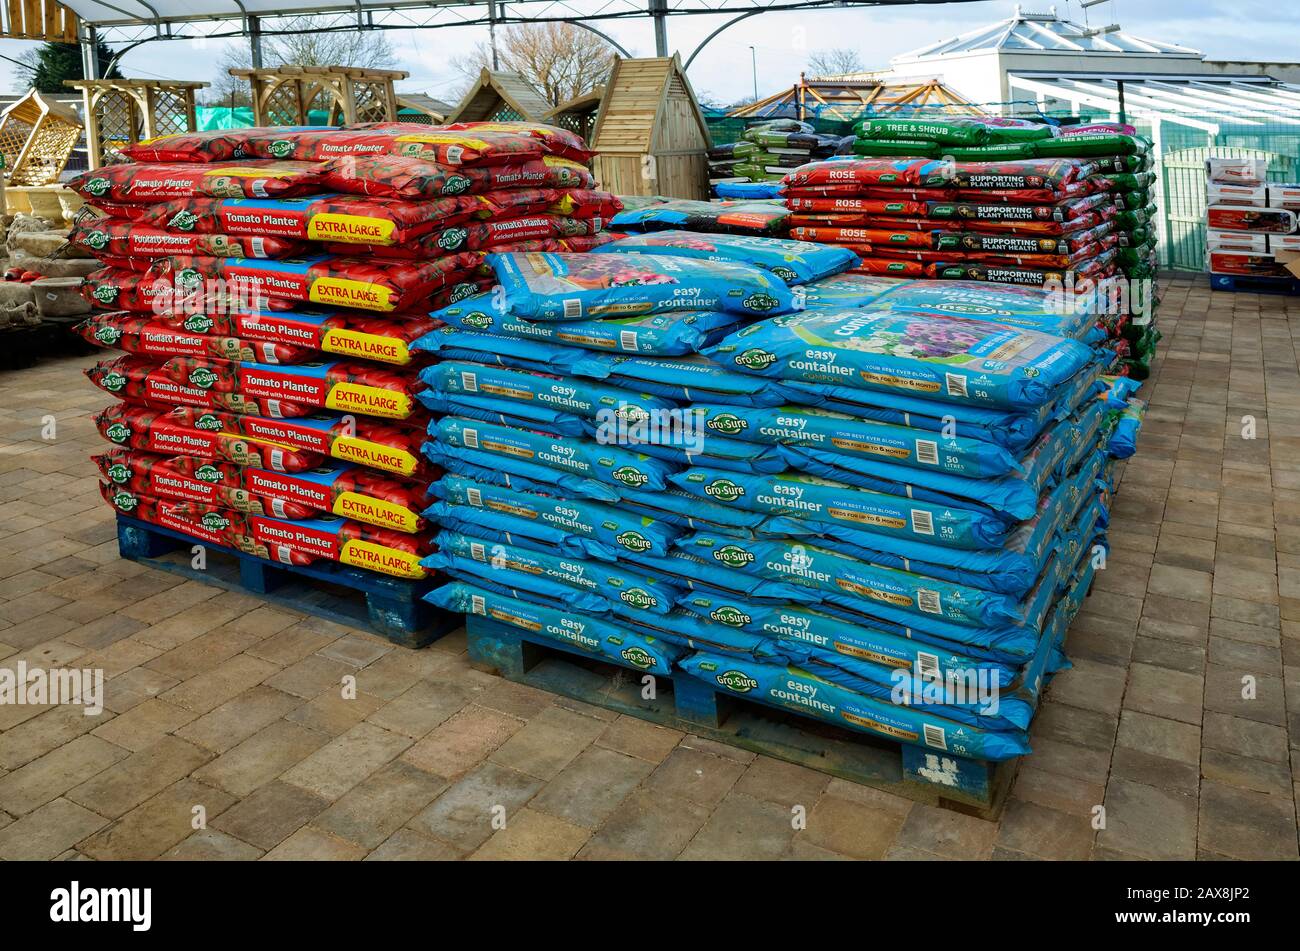 A display of  large Gro Sure Tomato Planter Packs and easy container compost in a garden centre used for growing tomato plants Stock Photo